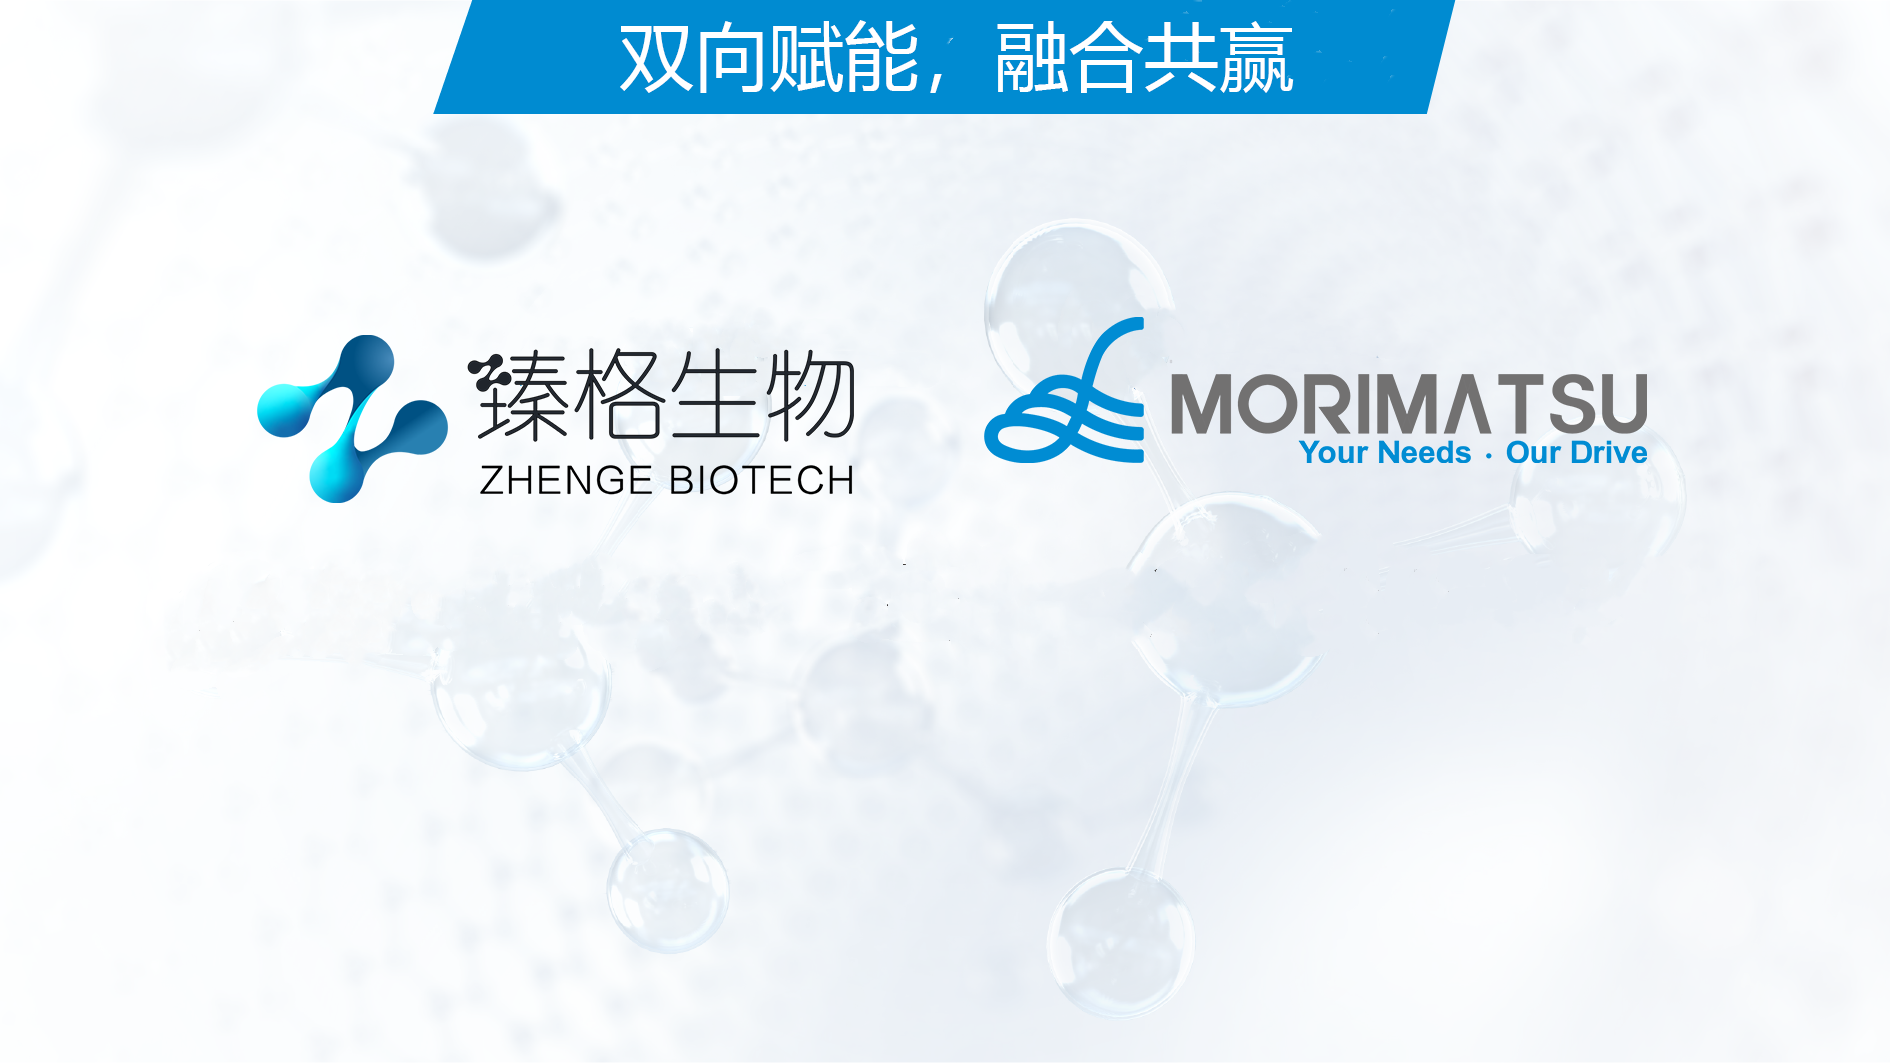 Integrating Power for Win-win Benefits, Morimatsu LifeSciences Joins with Zencore Biologics to Accelerate and Empower the Transformation and Innovation in the Biopharmaceutical Industry